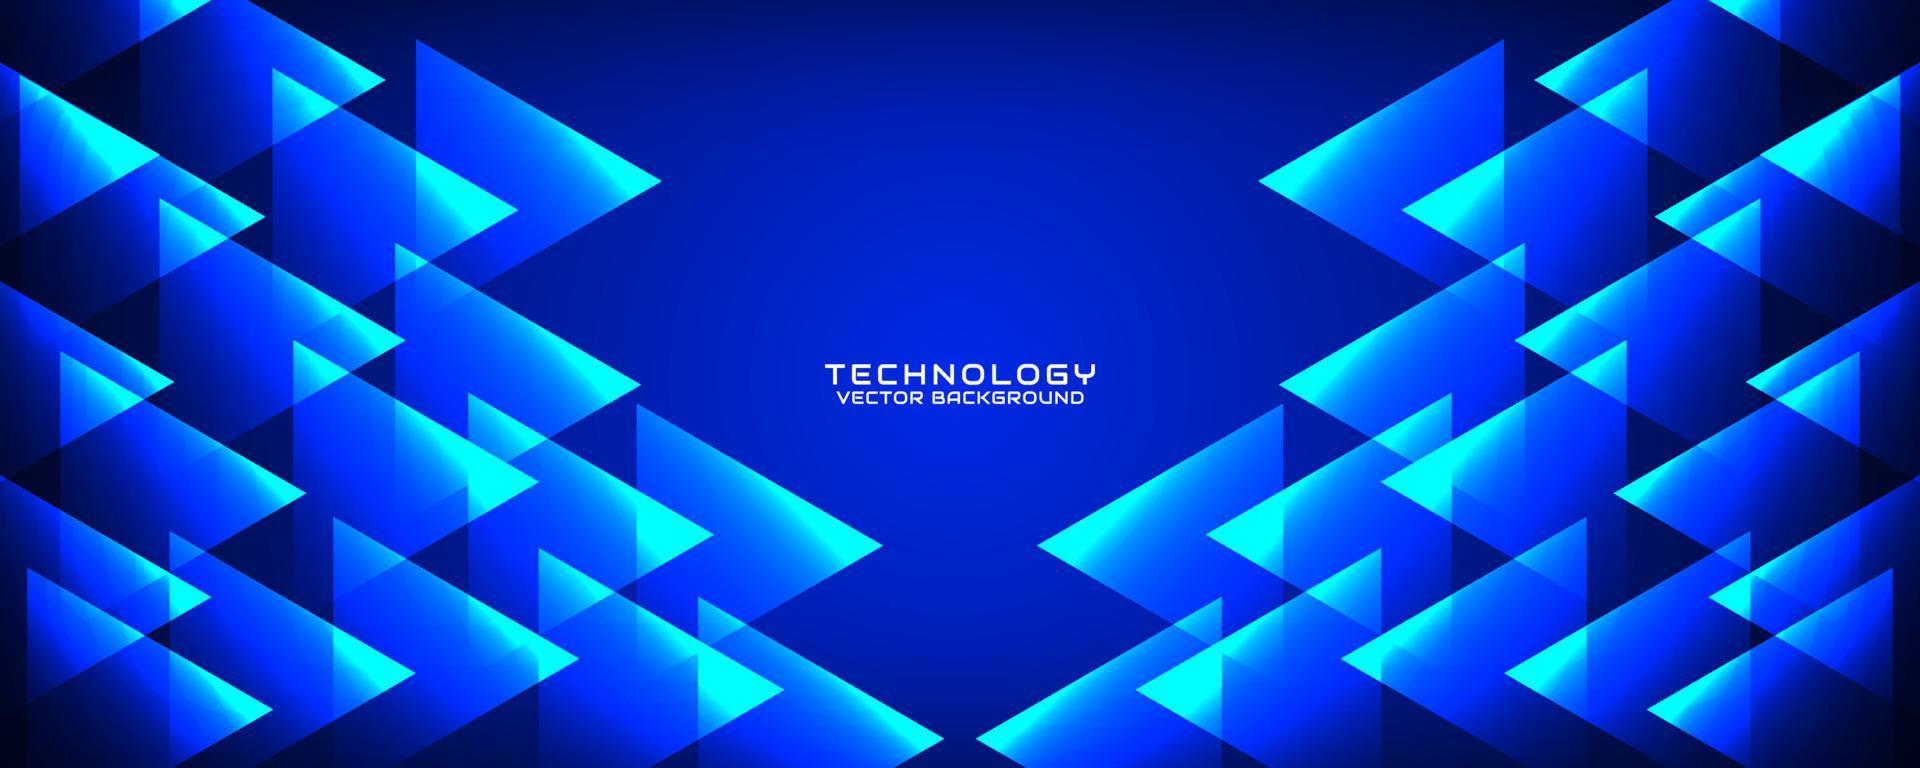 3D blue technology abstract background overlap layer on dark space with triangle effect decoration. Graphic design element cutout style concept for banner, flyer, card, brochure cover, or landing page vector